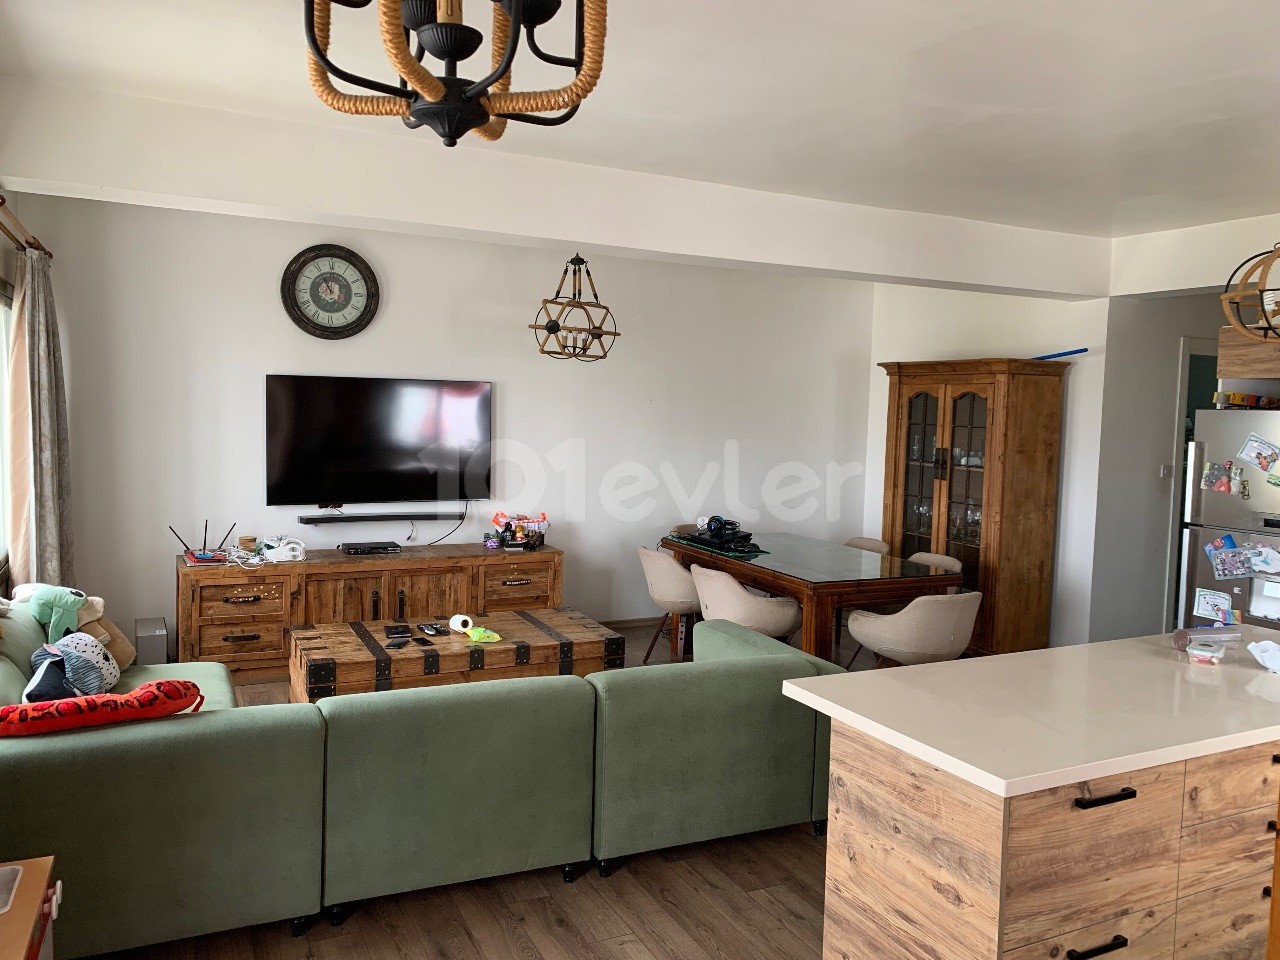 6 Bedroom Penthouse For Sale in Kyrenia Center